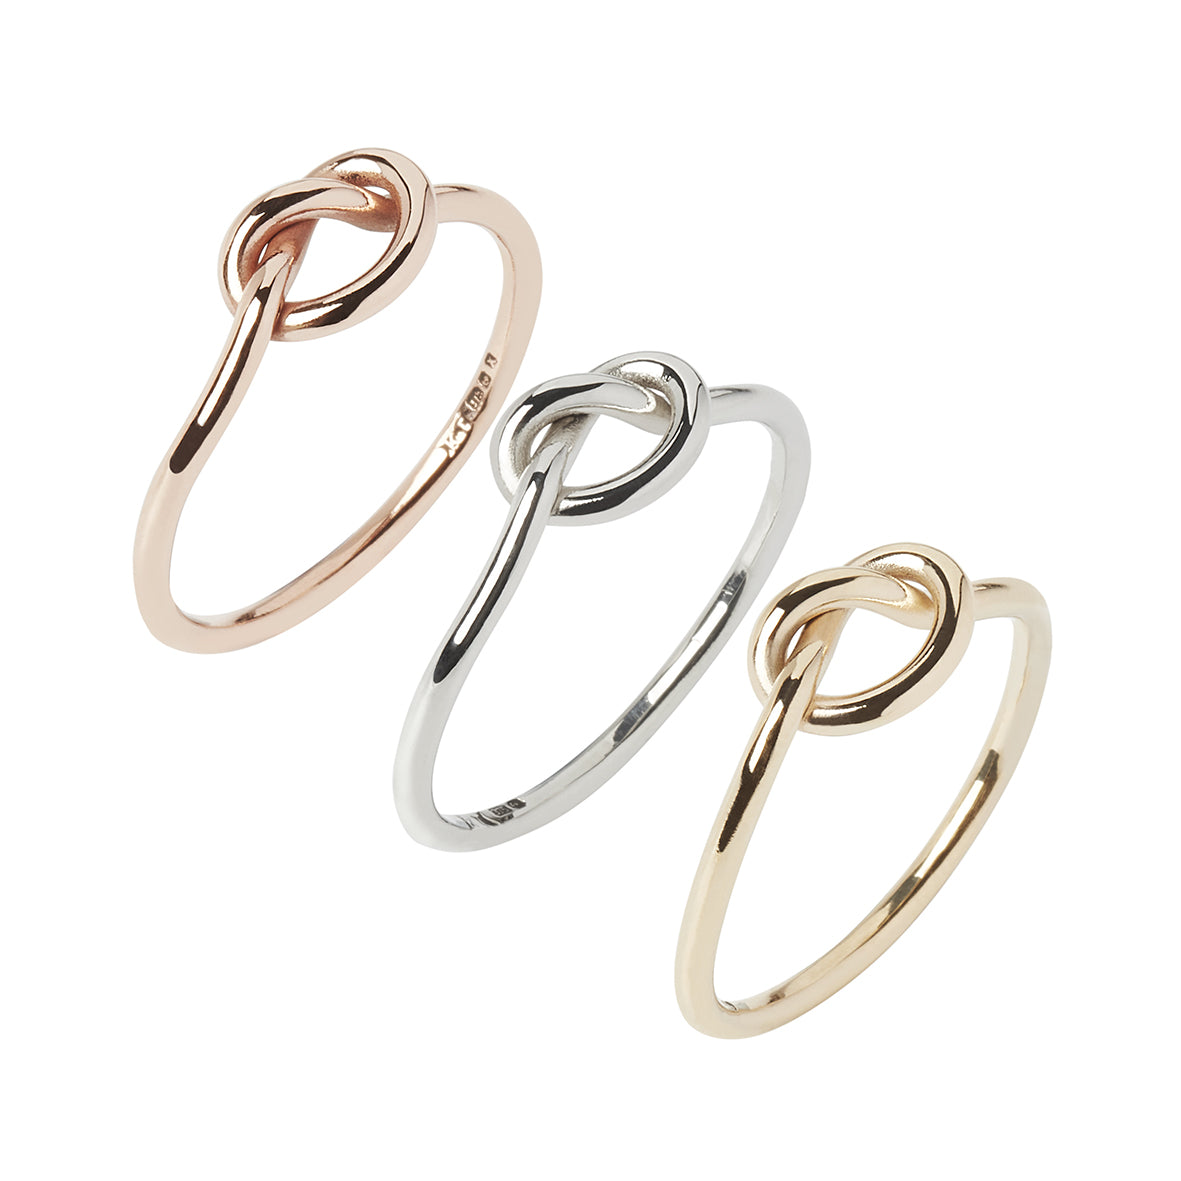 3 gold tie the knot promise rings, yellow, white and rose gold made from gold wire with a knot in the centre on a white background, handcrafted in Corbridge Northumberland, Kirsty Taylor Jewellery